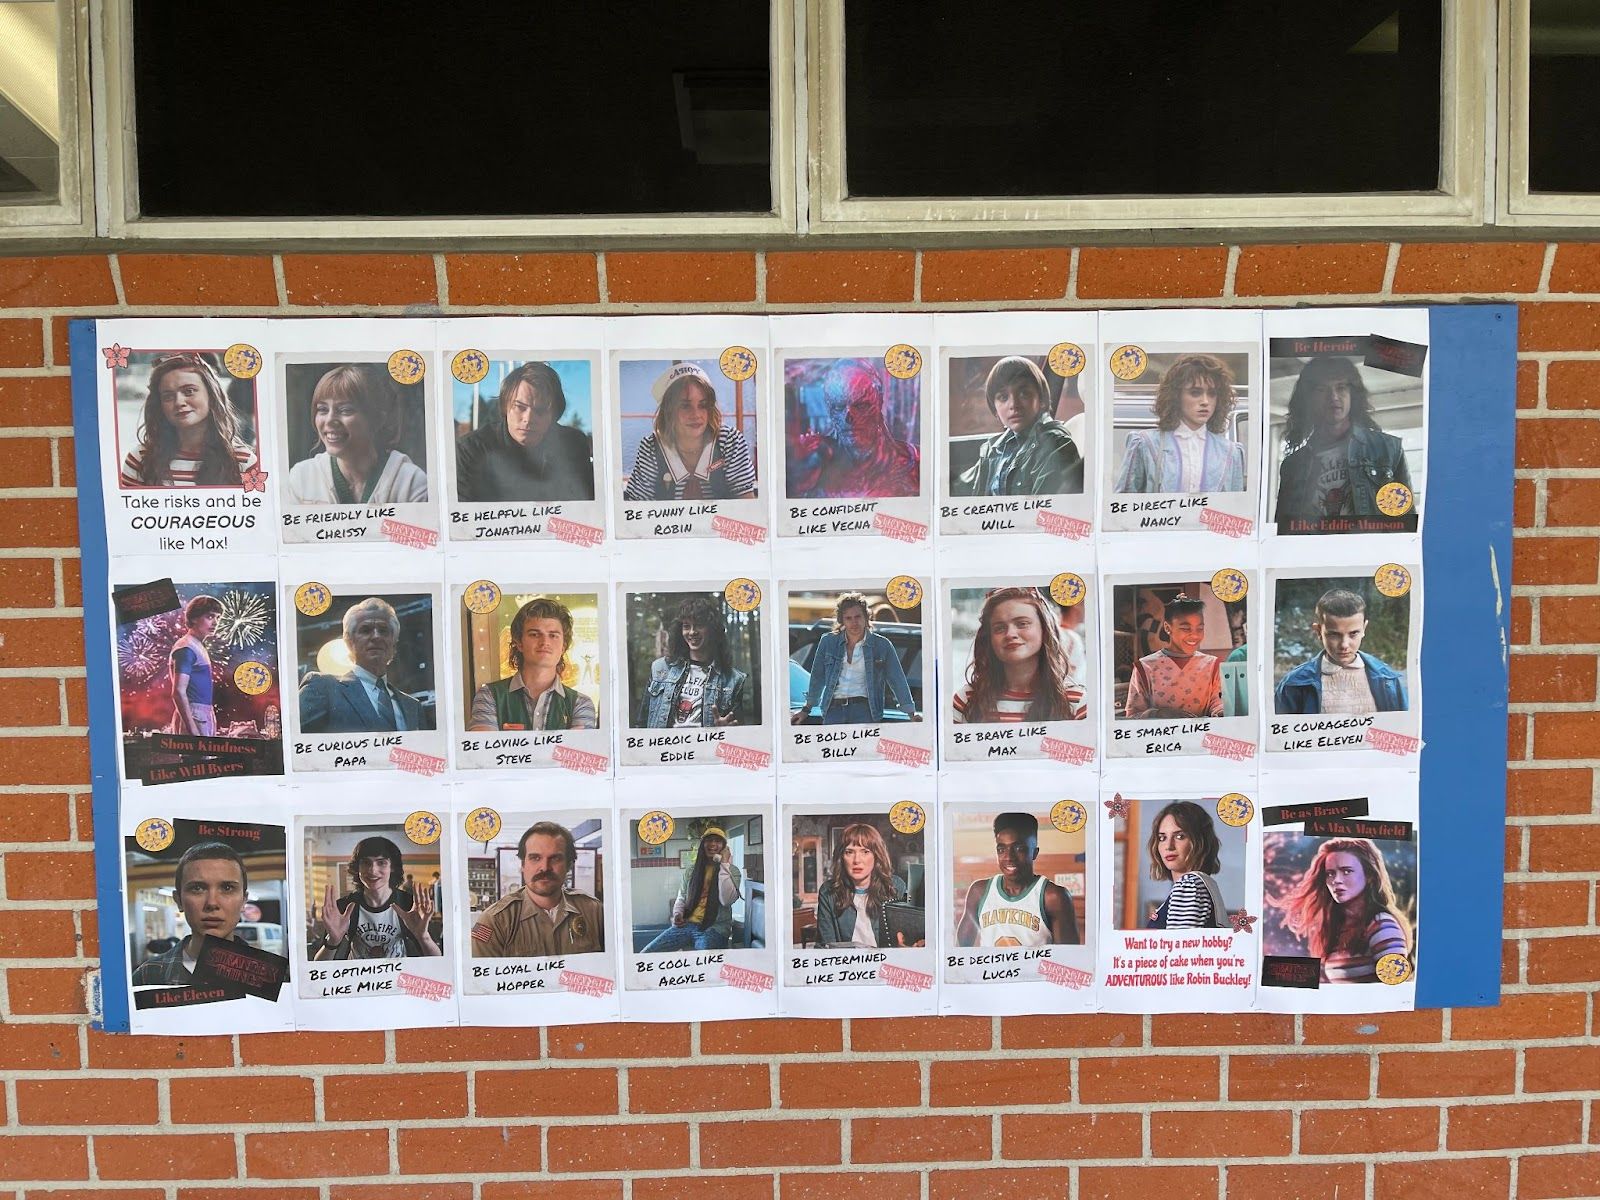 A poster for Kid Conference at Warner Middle School encourages students to emulate laudable qualities displayed by the show's characters. Photo courtesy of Westminster School District.